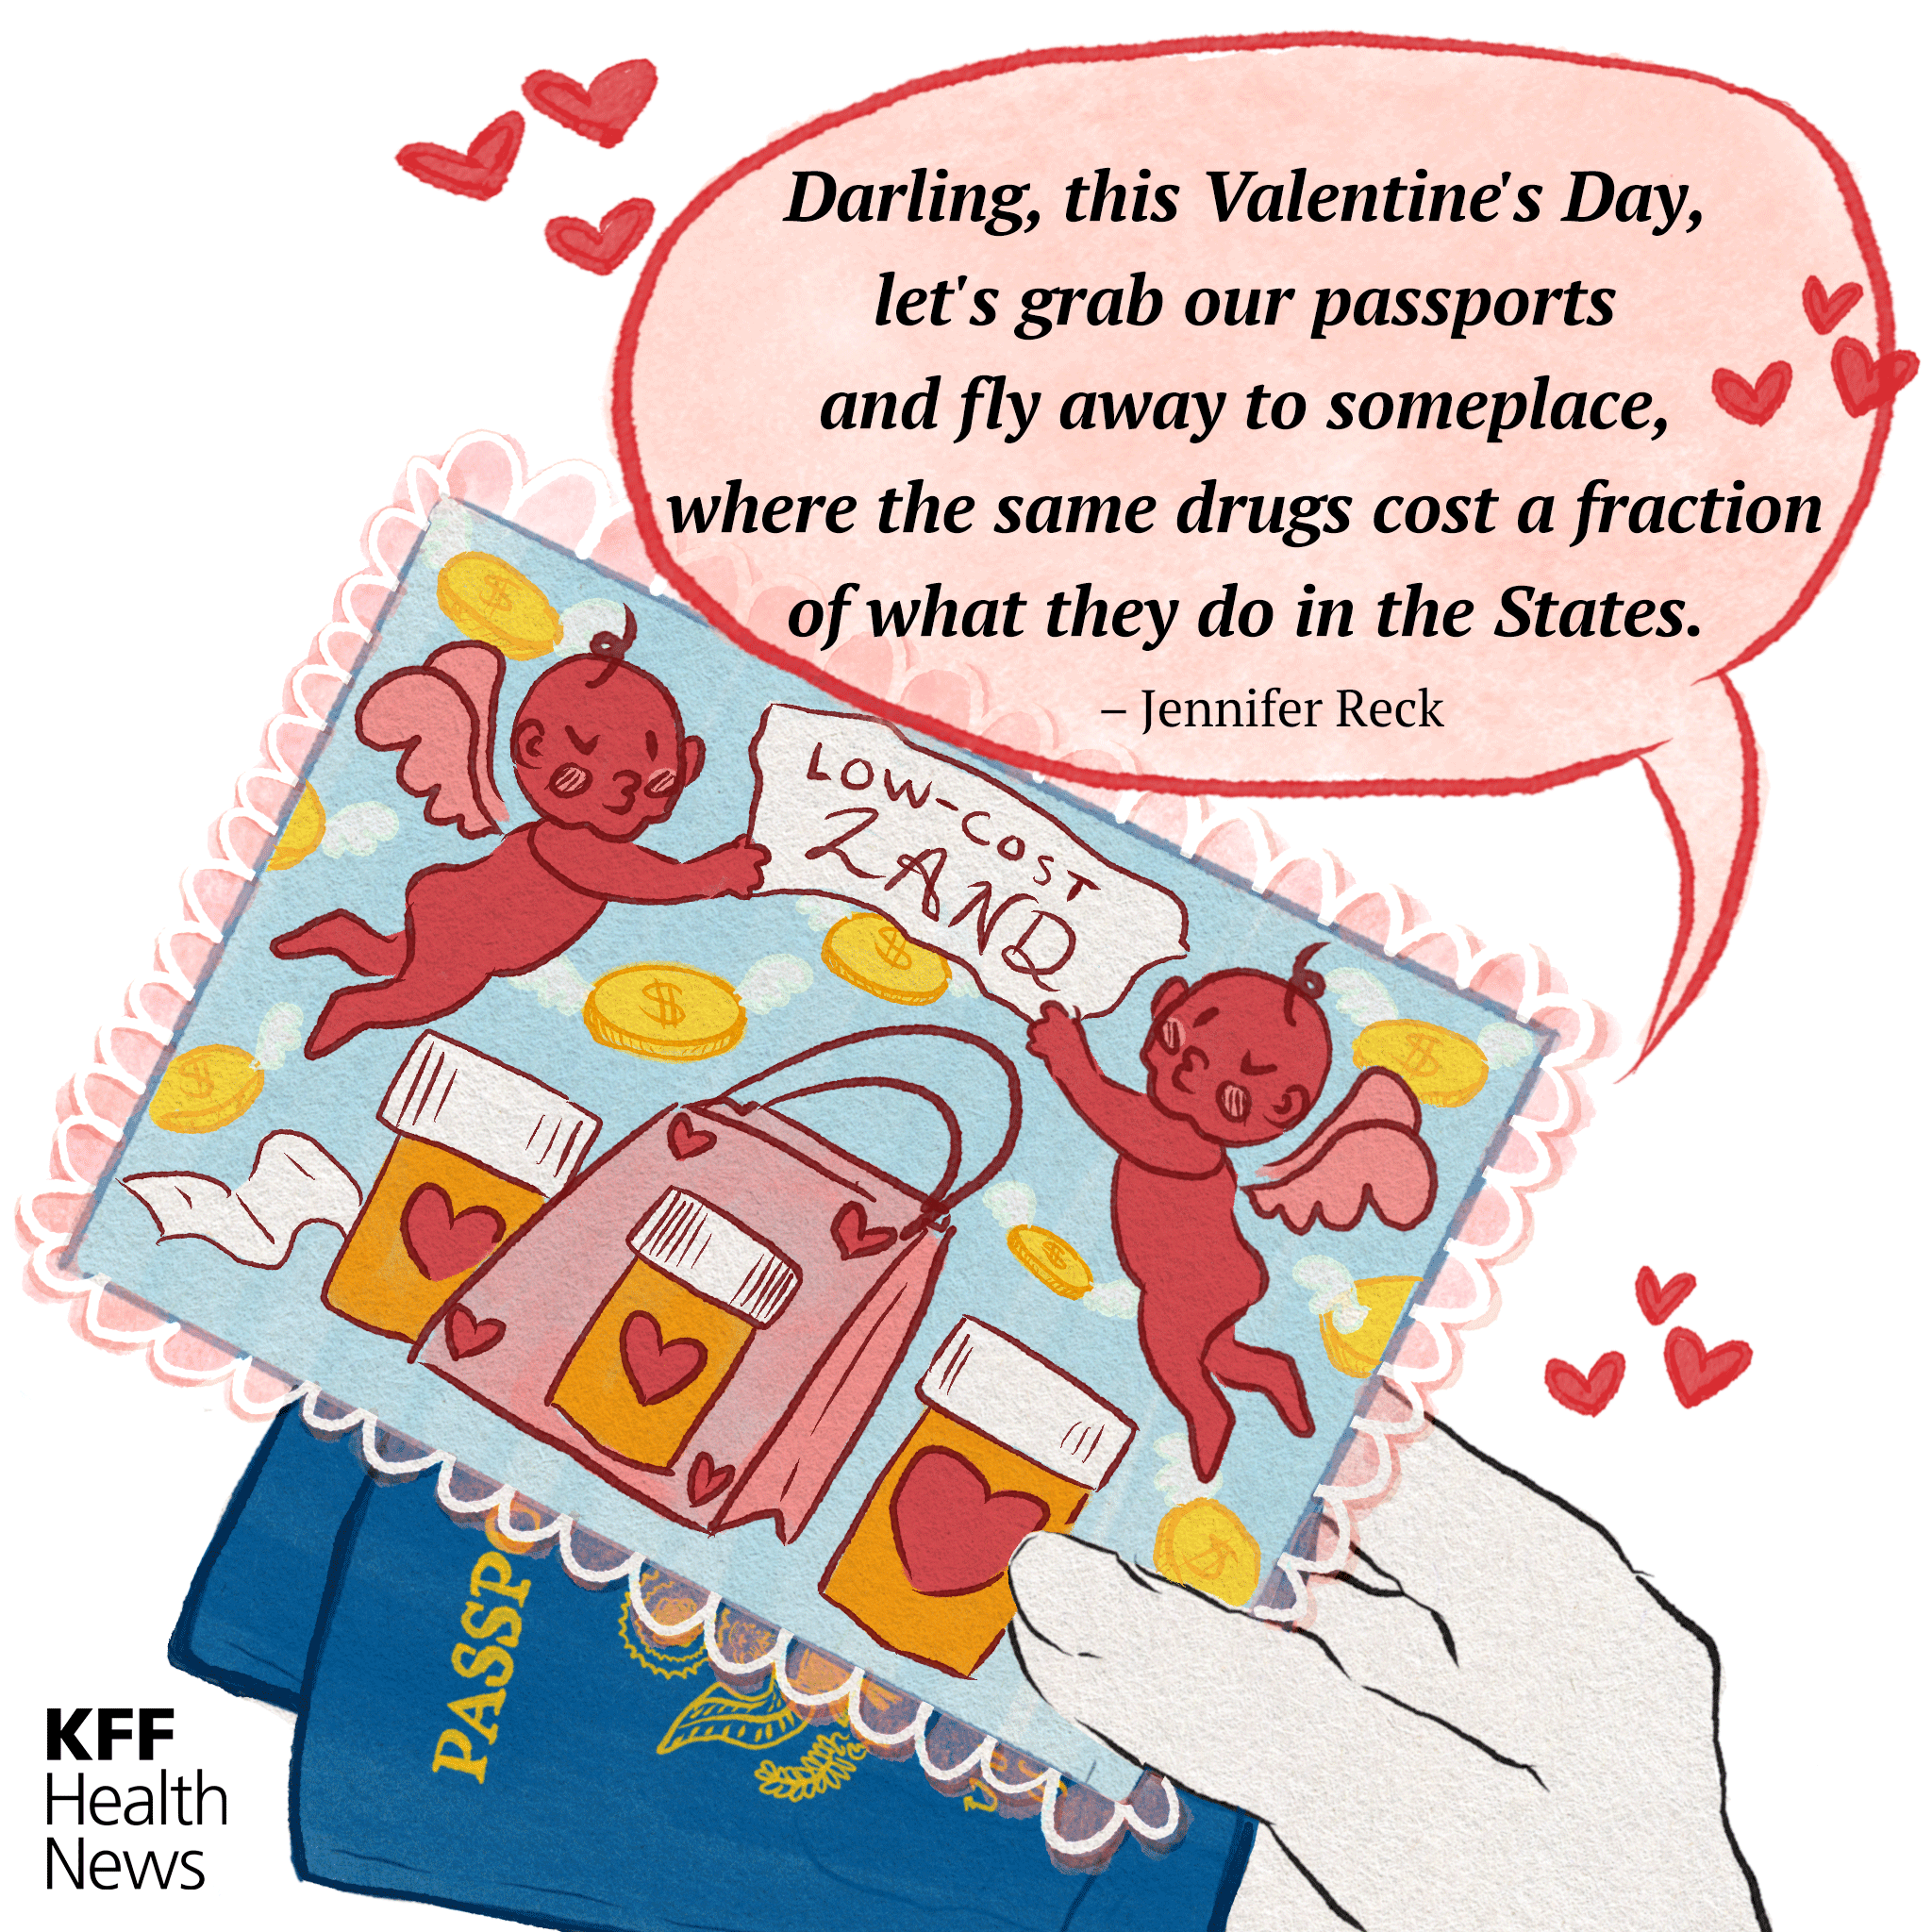 A colorful cartoon drawing shows a hand holding a postcard. The postcard image is of a banner reading “LOW-COST LAND” and being held by two cherry-red Cupids. Below the Cupids are prescription bottles and a shopping bag decorated with hearts. Gold coins with wings decorate the background. Two U.S. passports are visible tucked behind the postcard. A speech bubble coming from the person holding the card and passports reads, “Darling, this Valentine’s Day / let’s grab our passports / and fly away to someplace, / where the same drugs cost a fraction / of what they do in the States.”